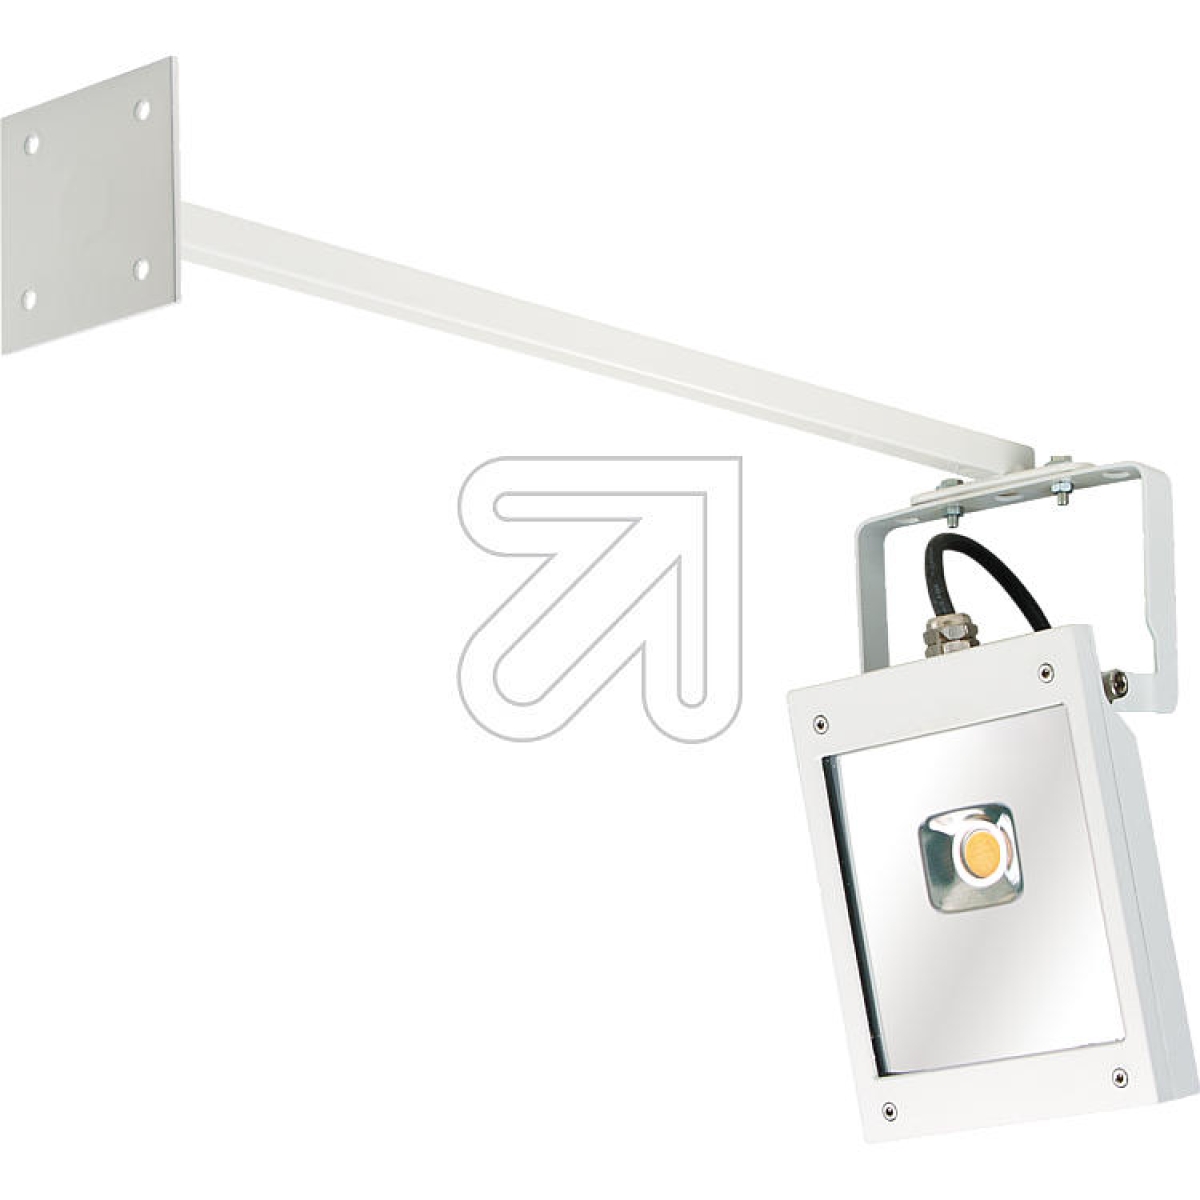 Licht 2000LED advertising light IP65 3500K 12W white 50040 (with bracket)Article-No: 628200